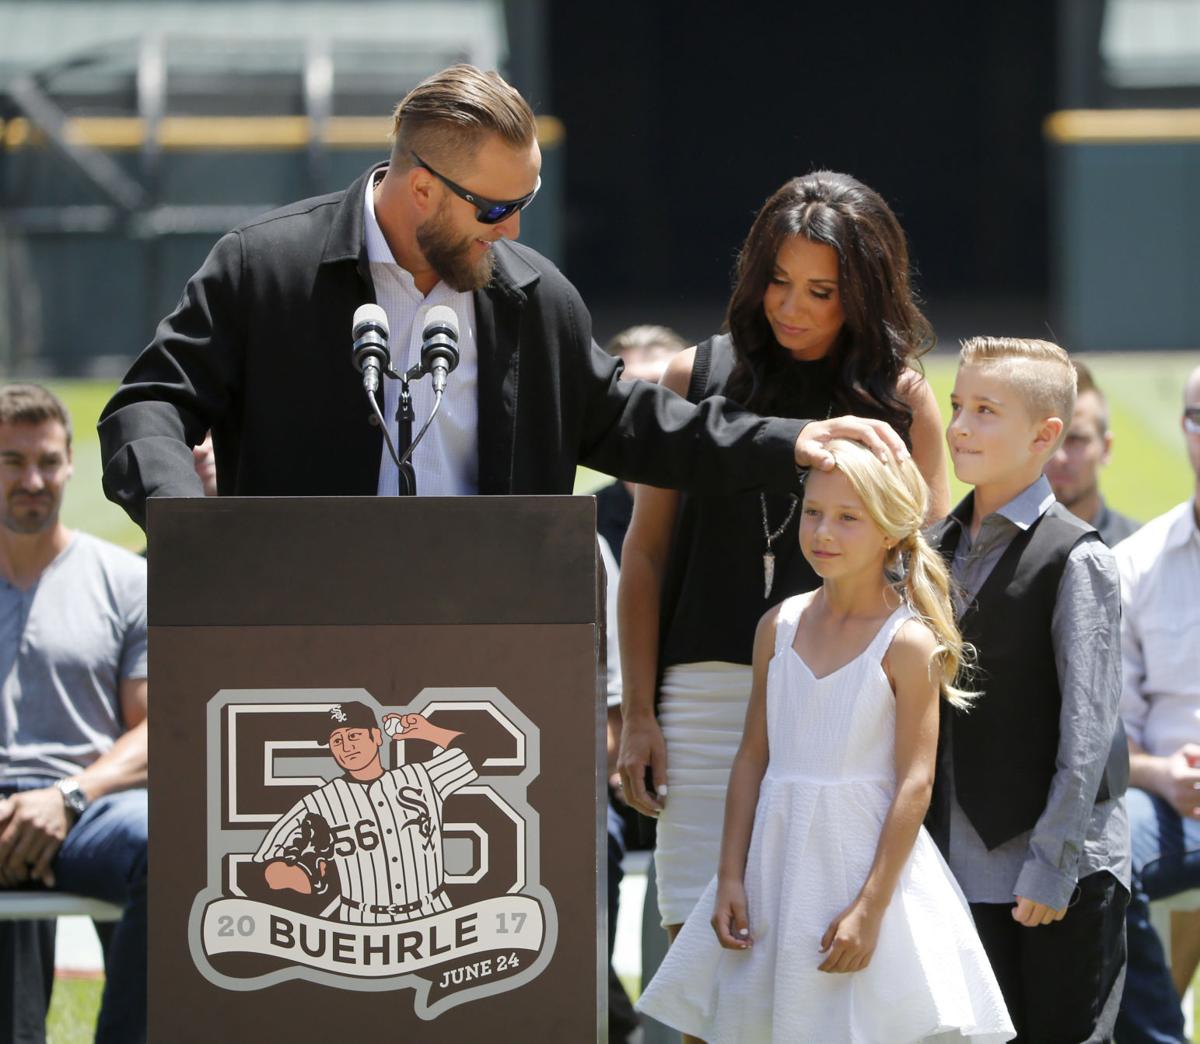 White Sox retire former star pitcher Mark Buehrle's No. 56 jersey